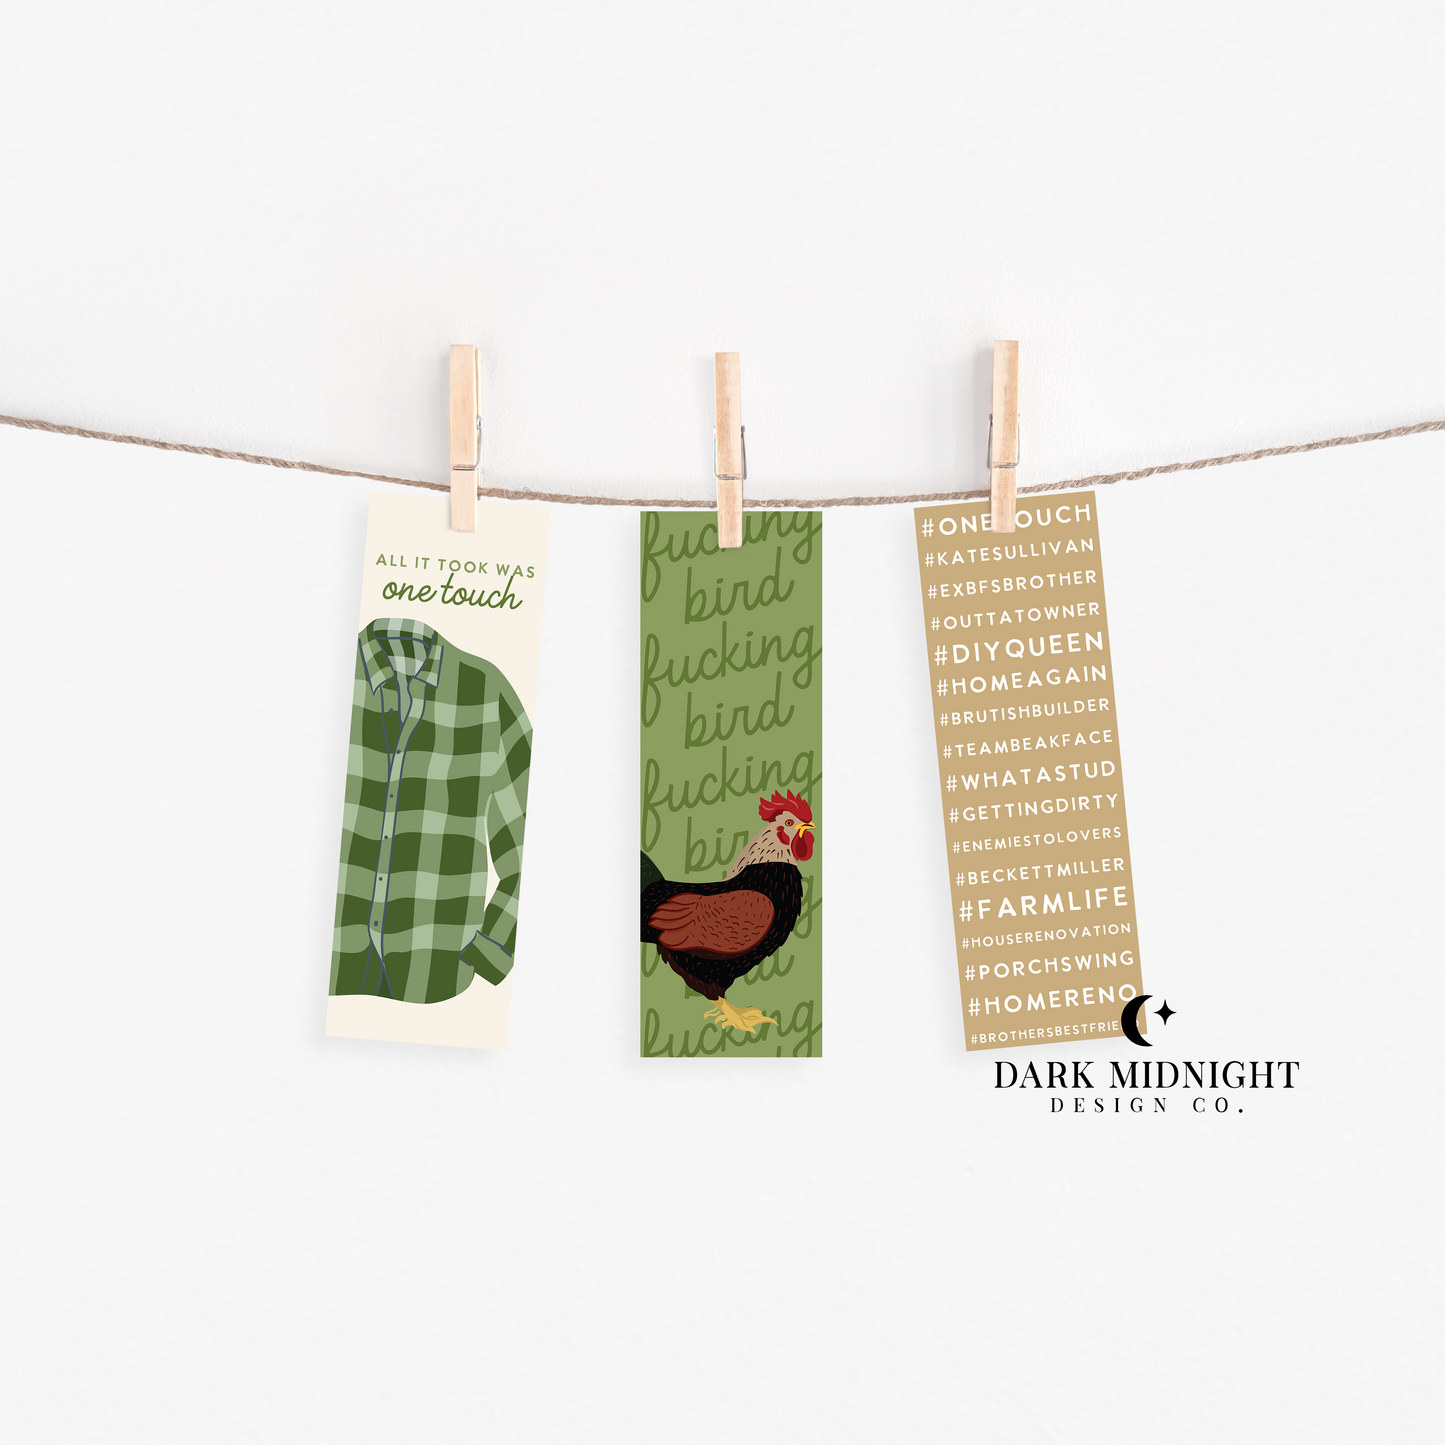 One Touch Hashtags Bookmark - Officially Licensed Sullivan Family Series